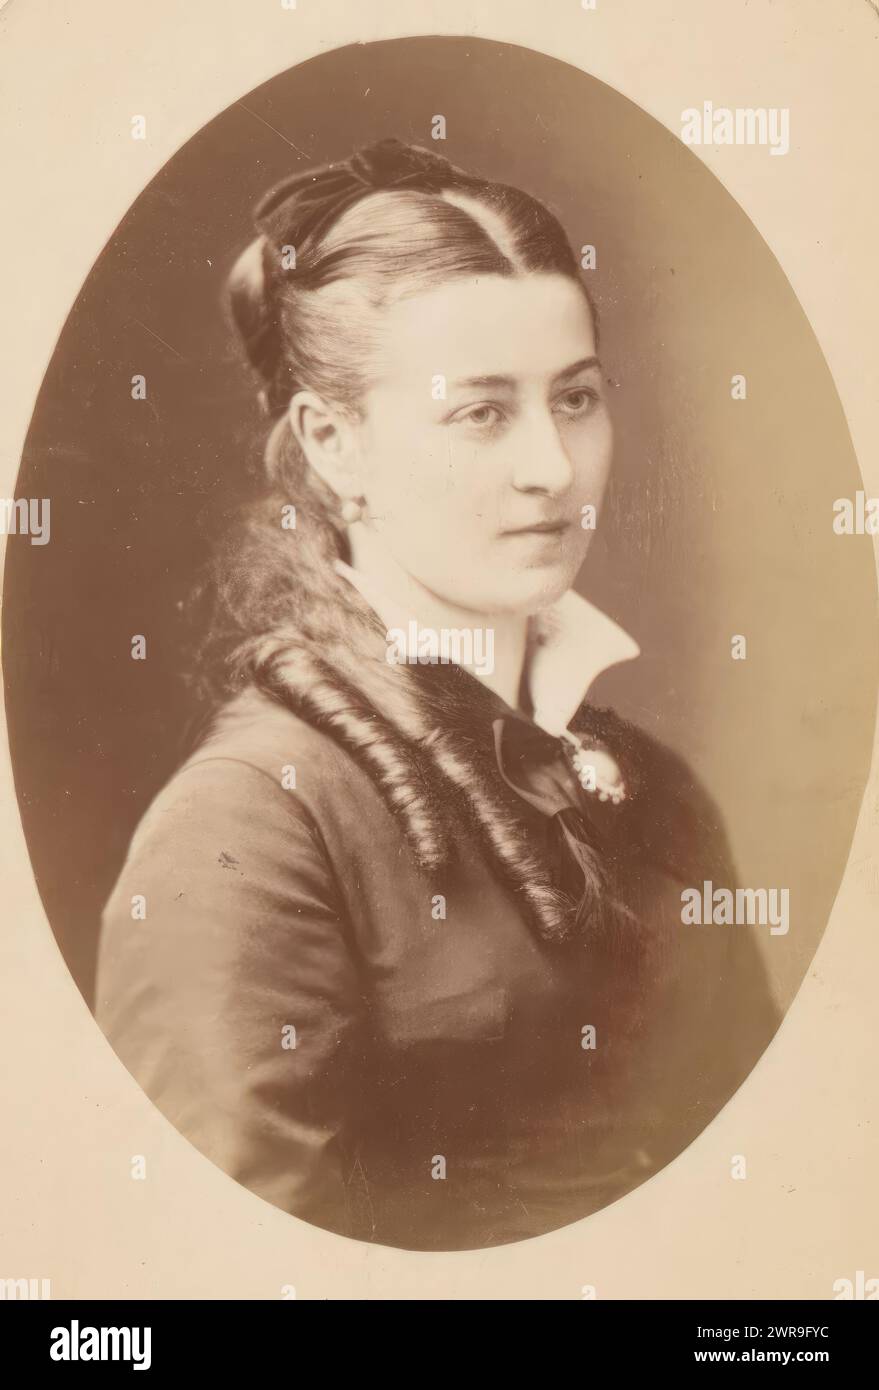 Portrait of a young woman with ringlets, This photo is part of an album., Walter Damry, Brussels, c. 1879, cardboard, albumen print, height 82 mm × width 52 mm, photograph Stock Photo